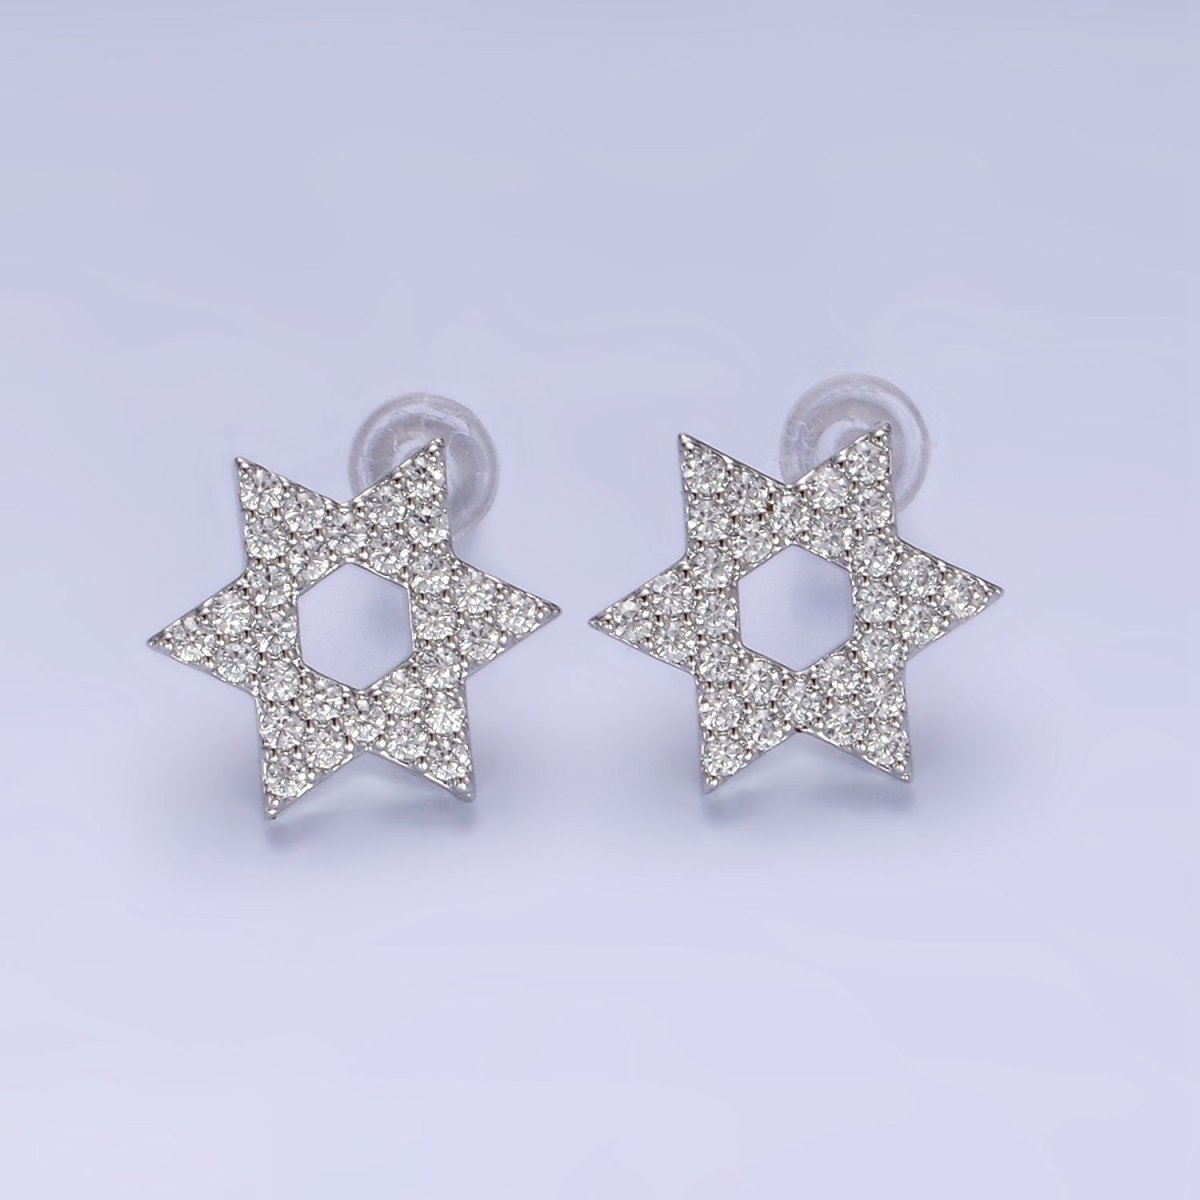 14K Gold Filled Micro Paved CZ Star of David Stud Earrings in Gold & Silver | AB1273 AB1274 - DLUXCA